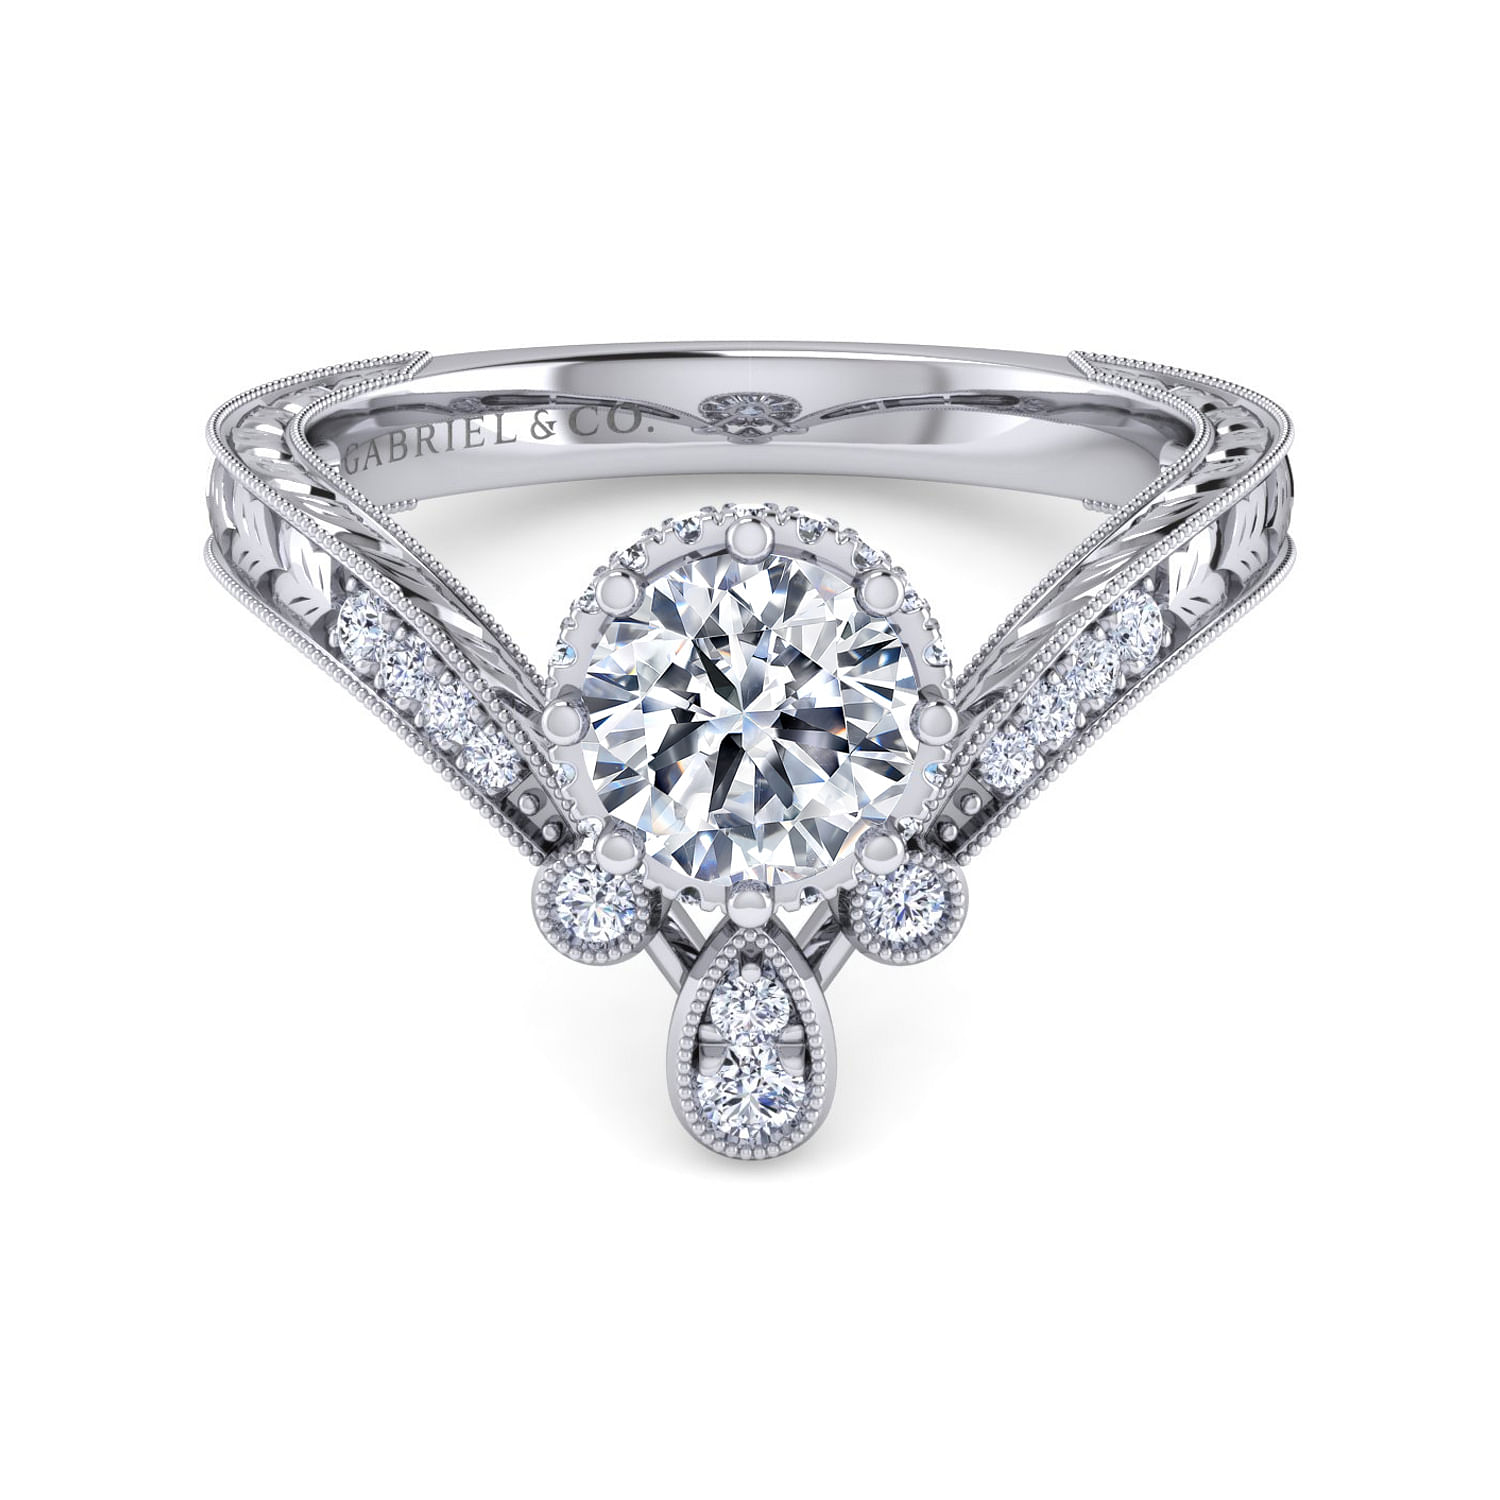 Gabriel - Vintage Inspired 14K White Gold Curved Round Diamond Engagement Ring